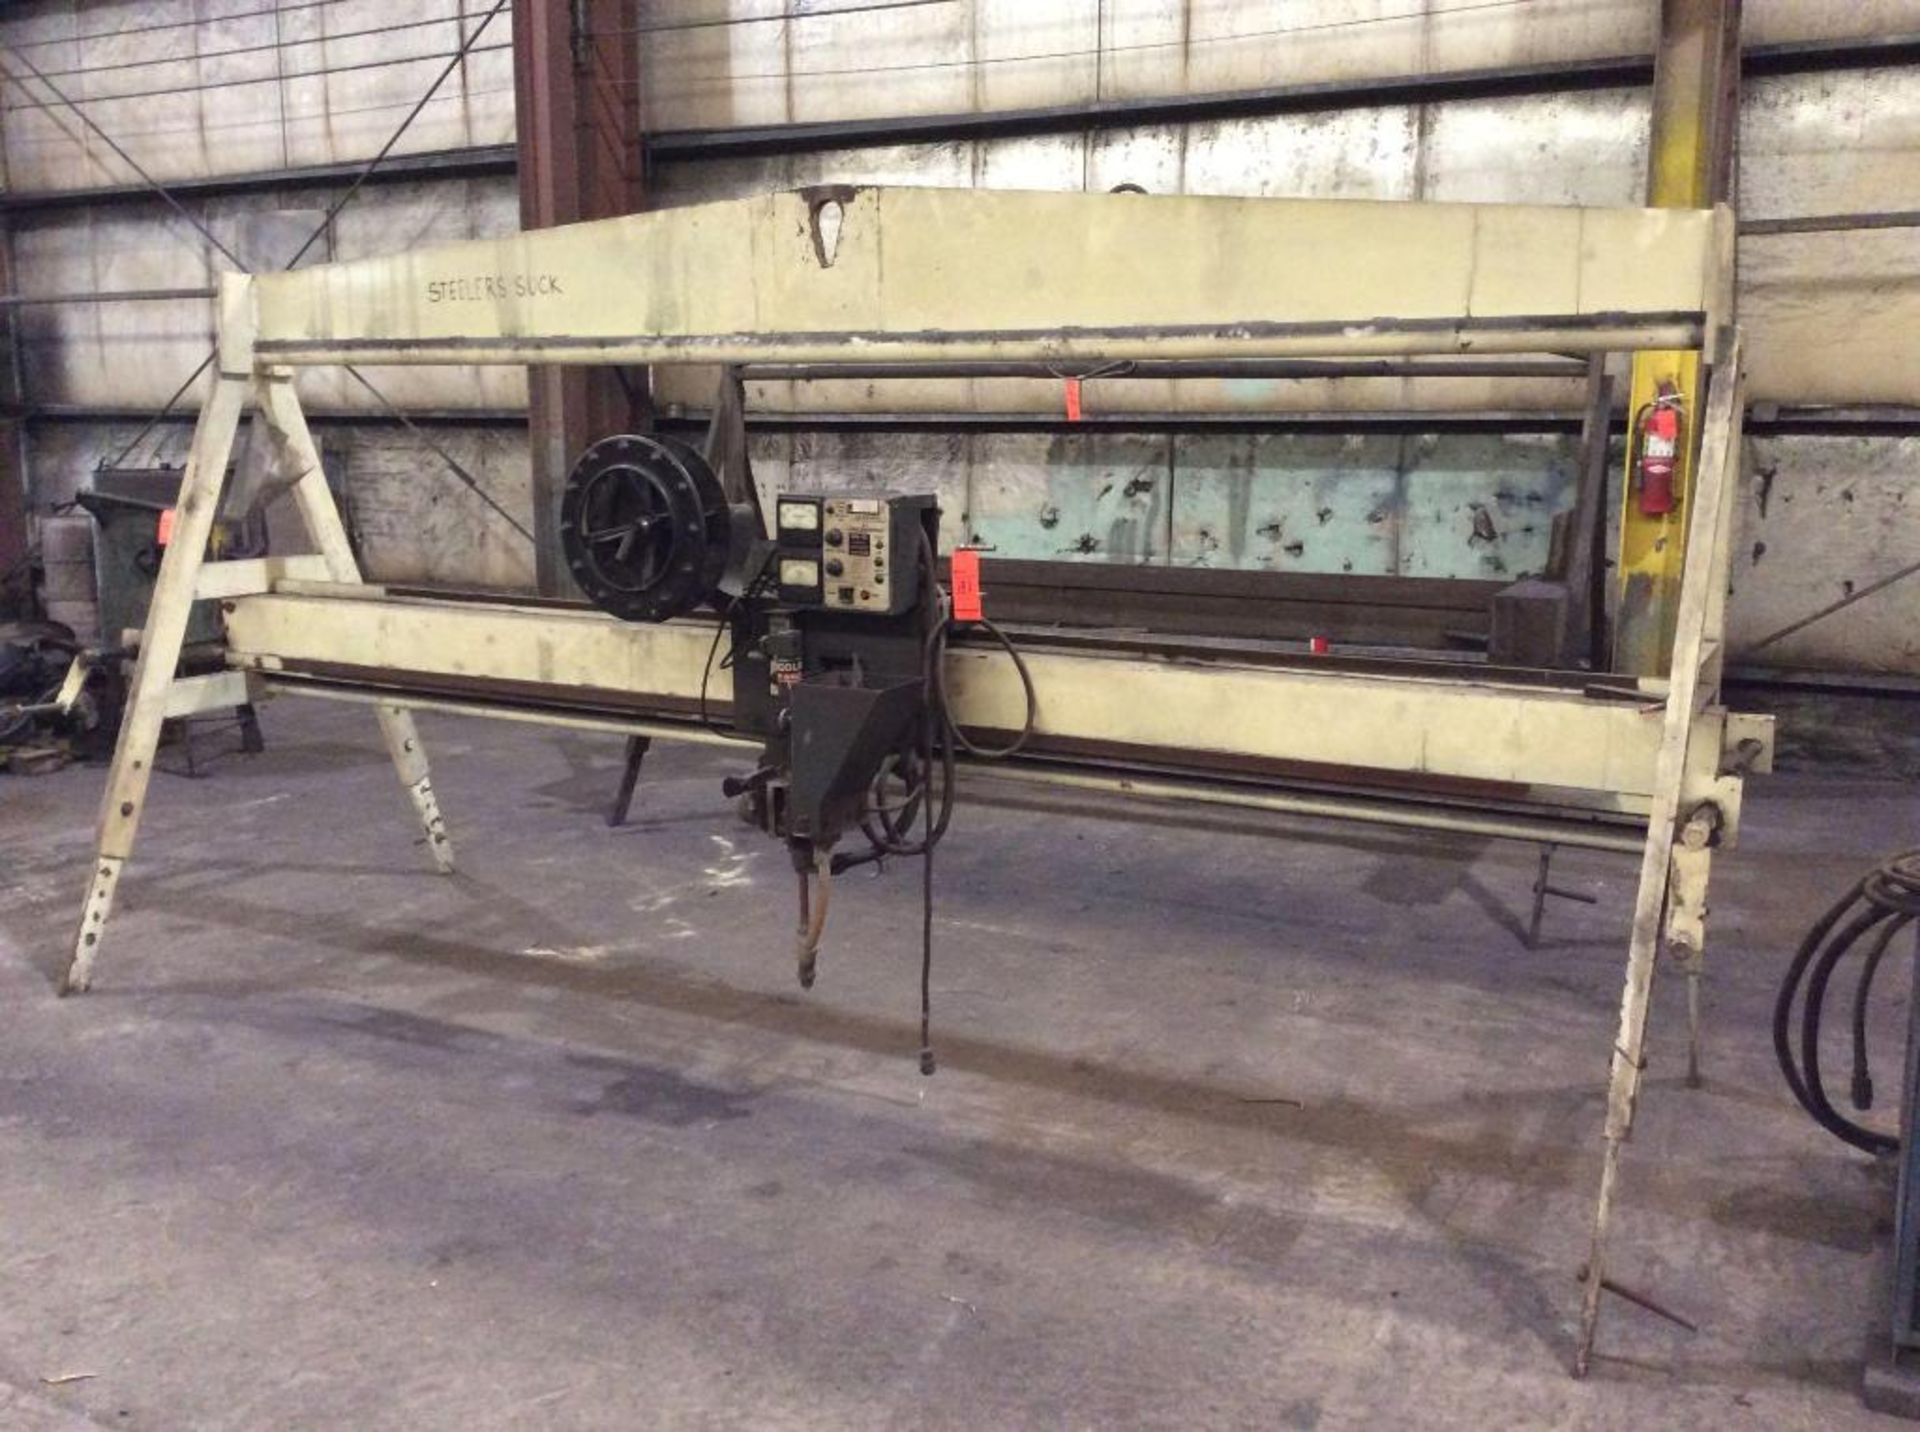 15' traveling head seam welder with Lincolnweld NA-3S wire feed and welding supply - Image 3 of 3